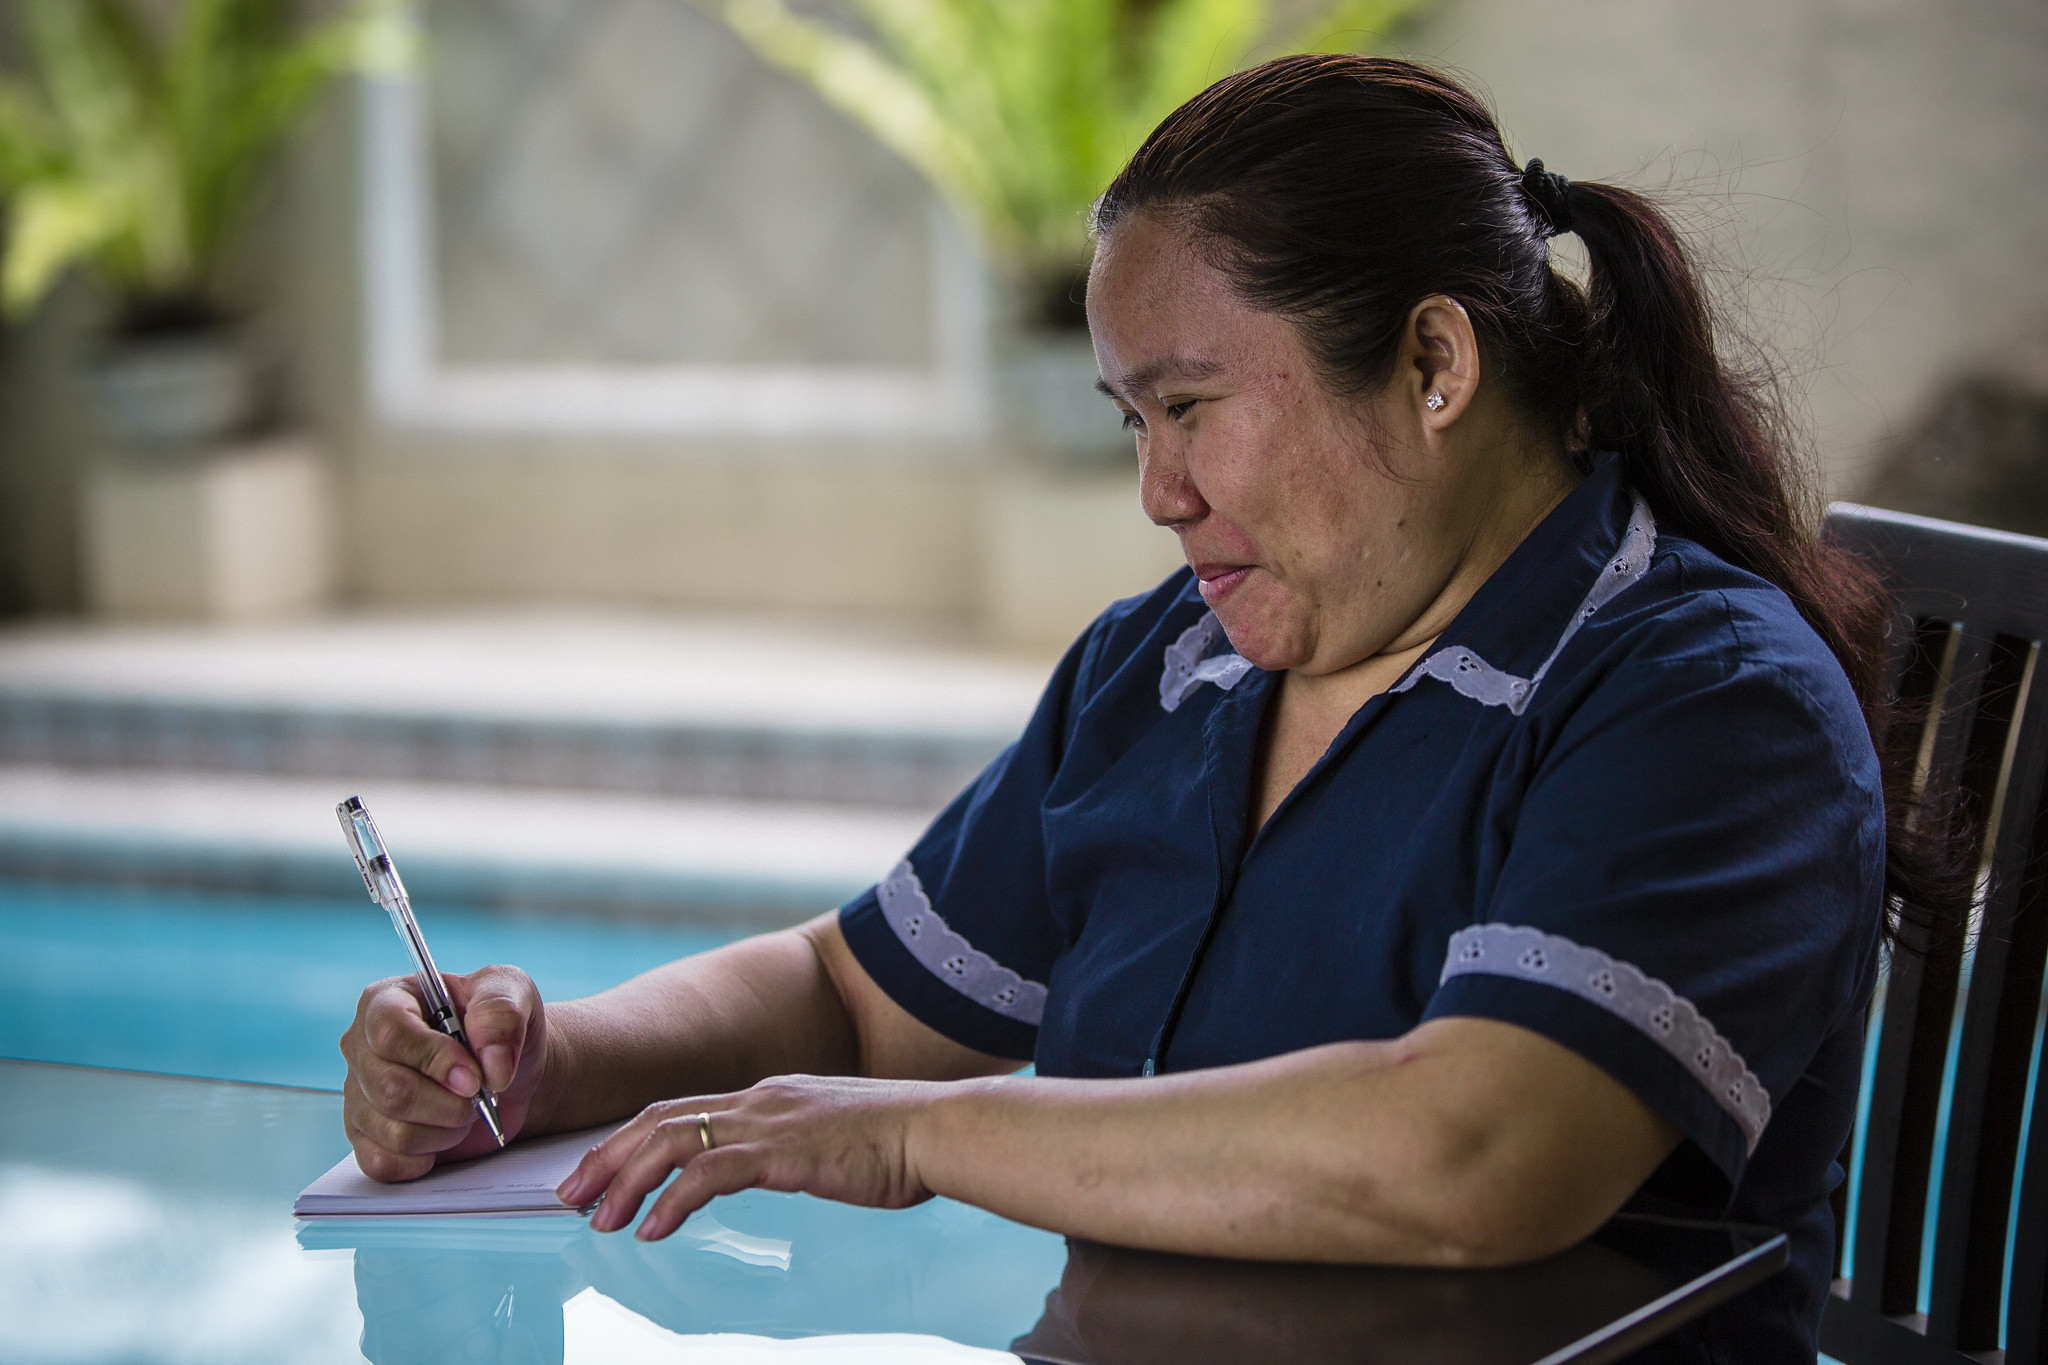  Domestic Workers in the Philippines writing in pad on table by pool